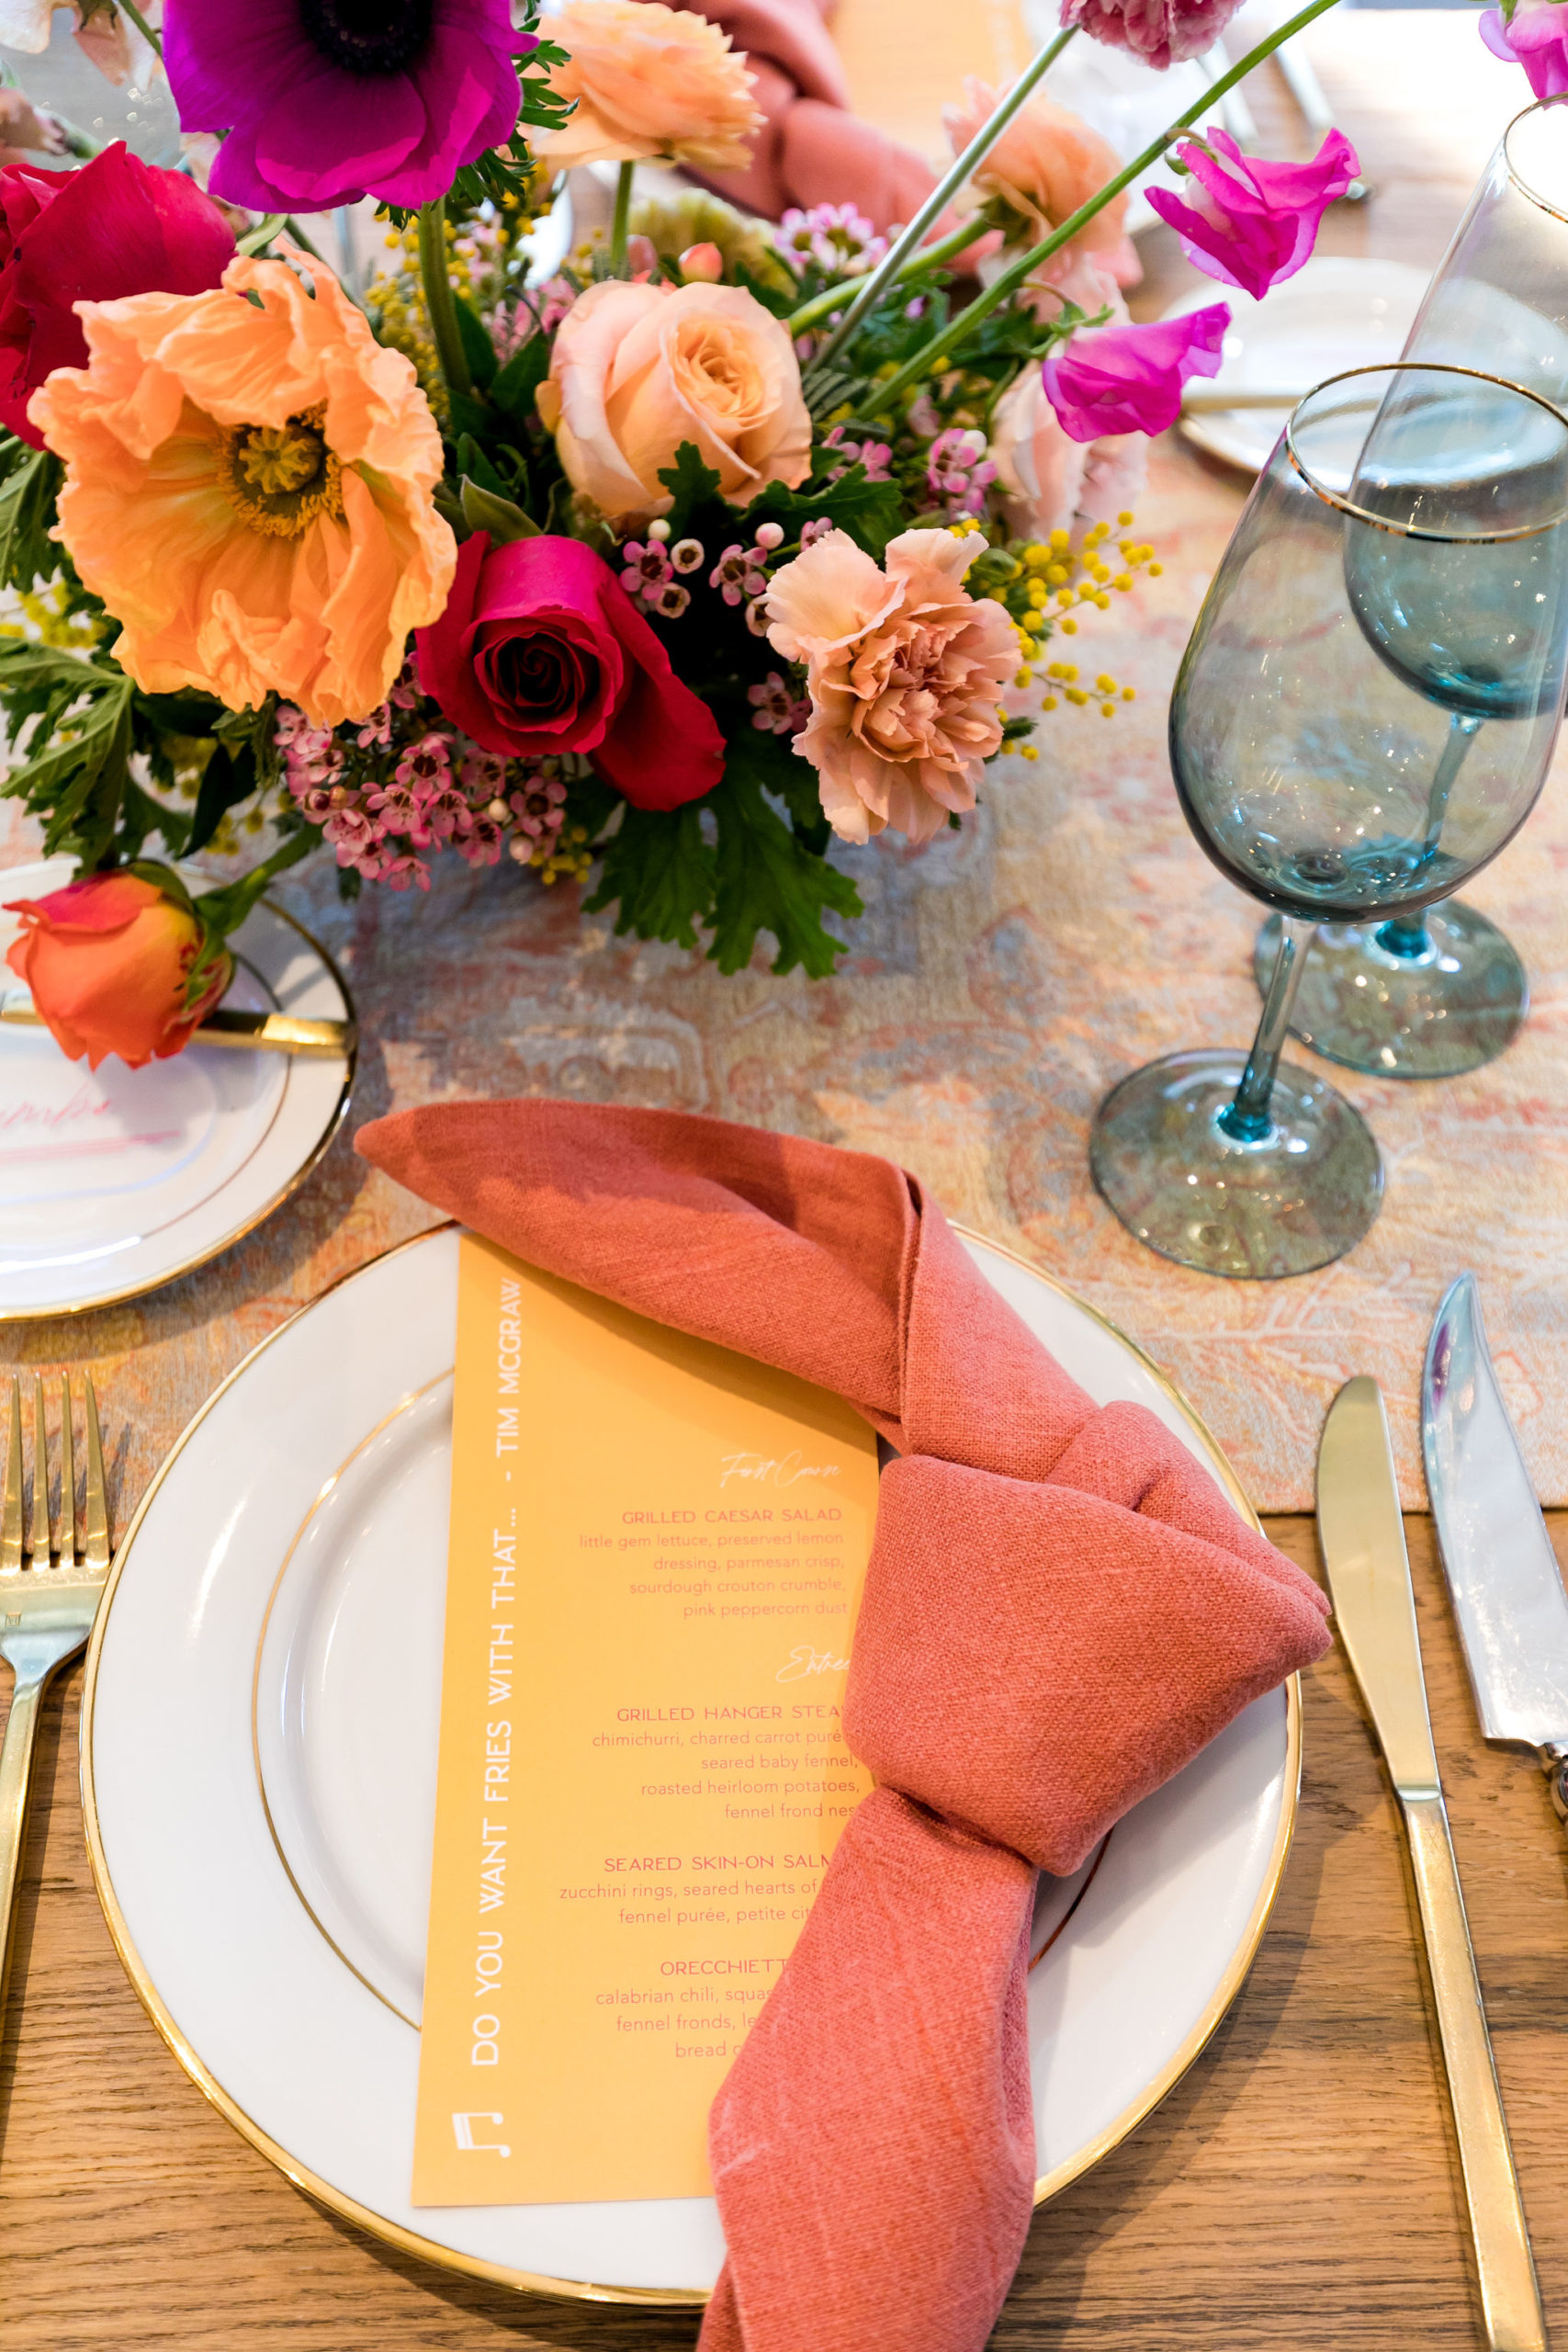 bright and energetic wedding reception tables with orange napkins and menu, with red, purple, orange and pink floral centerpieces on wooden farm tables